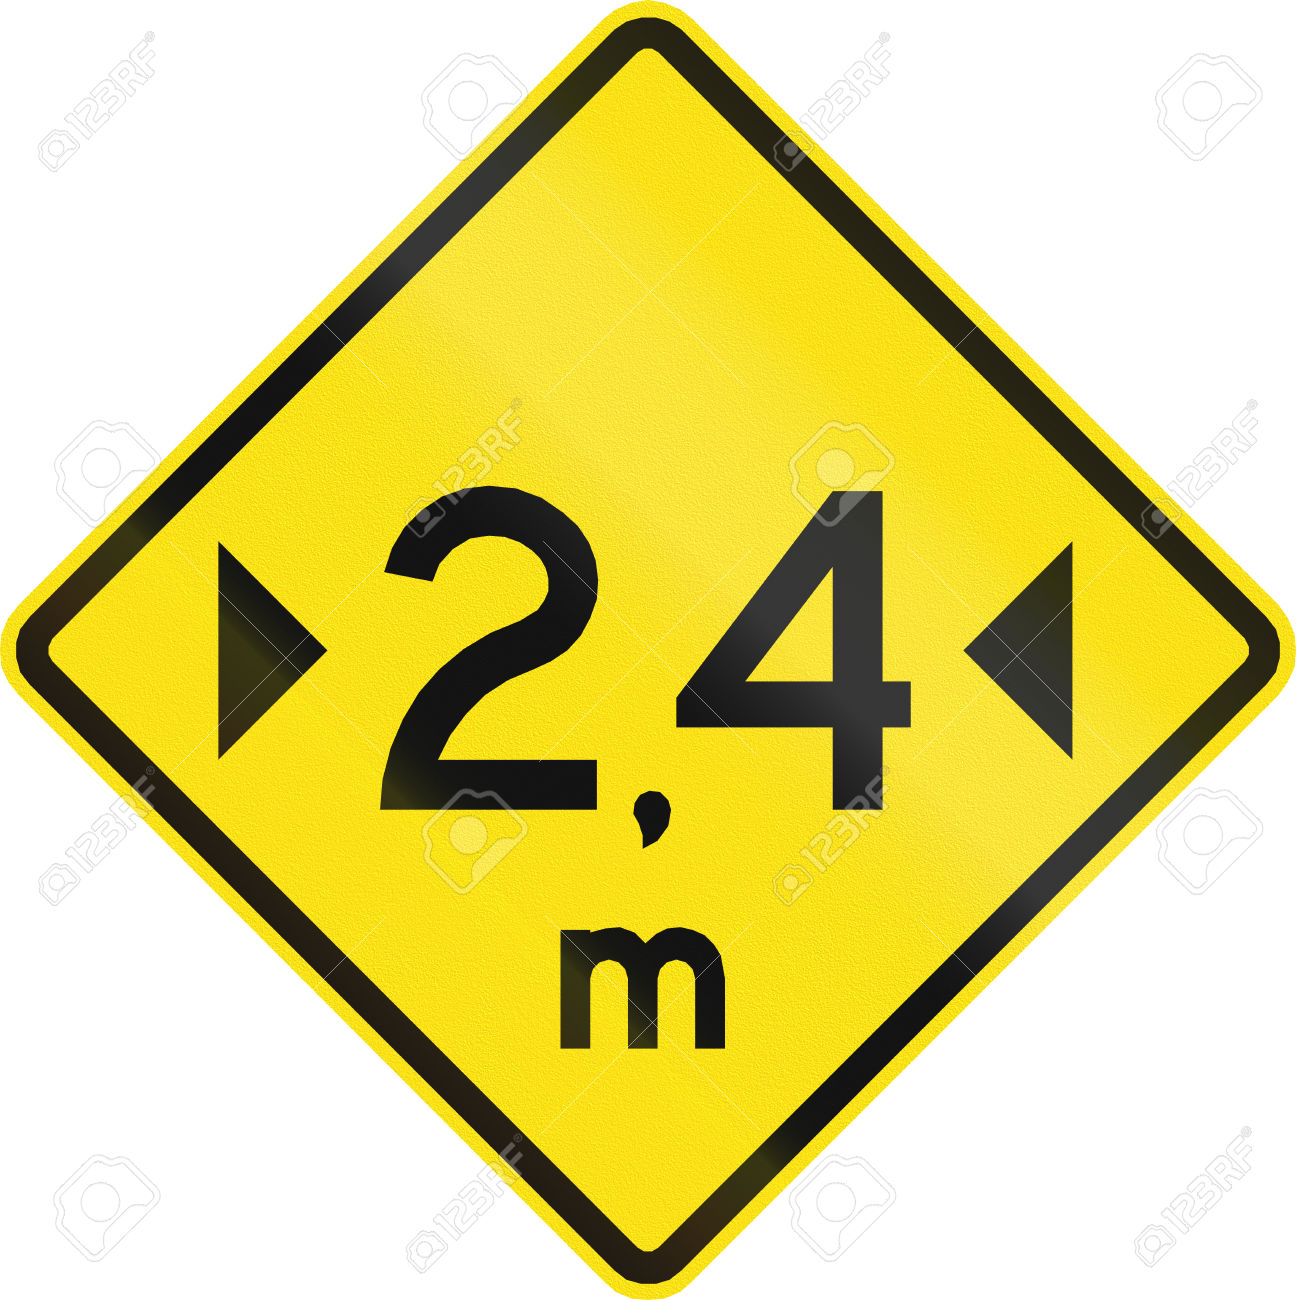 Warning Road Sign In Chile: Width Restriction Ahead (2,4 Meters.